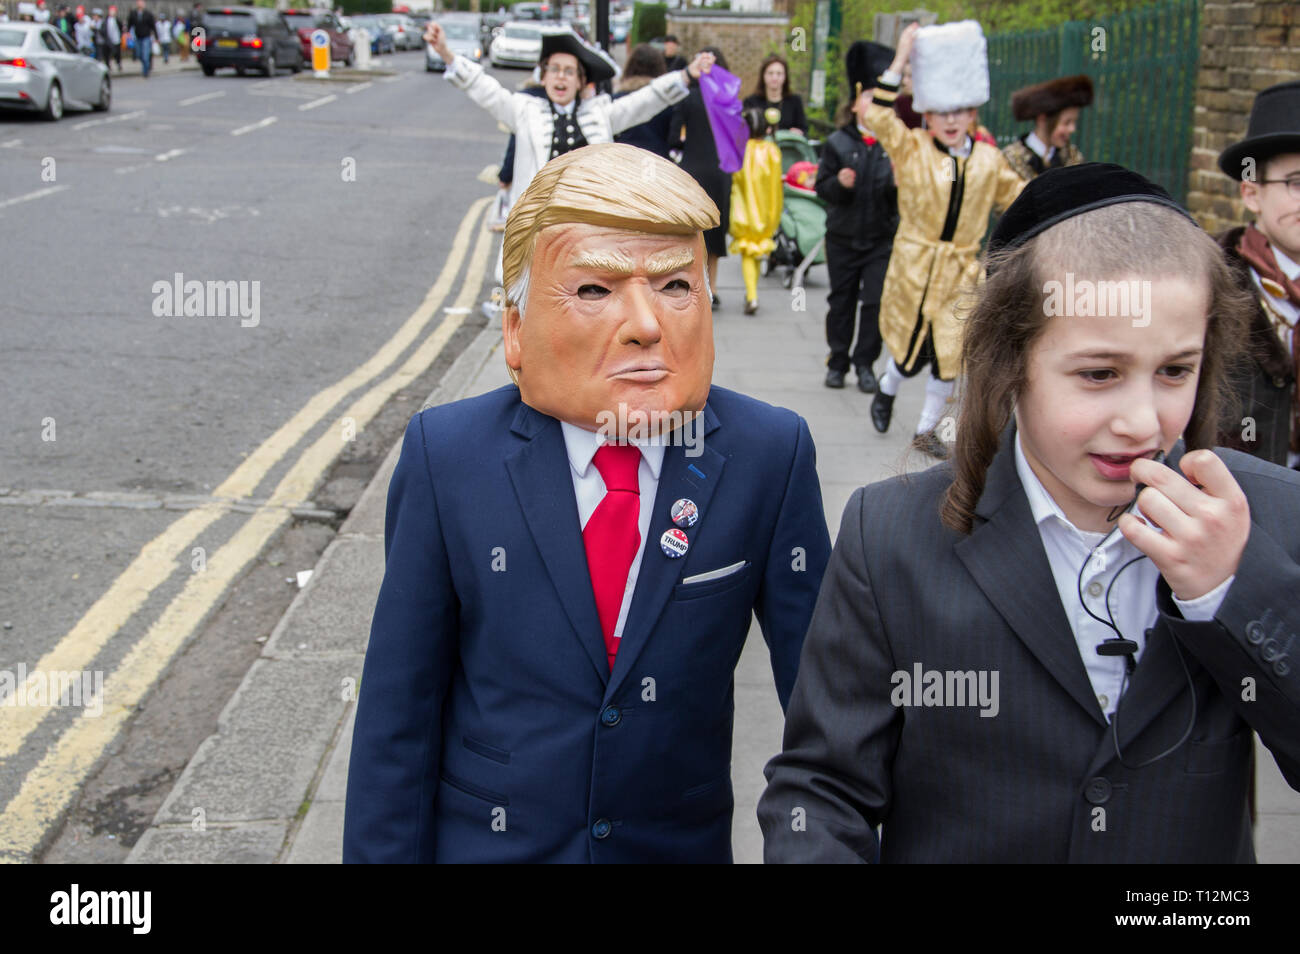 Boy marching in Donald Trump mask and suit jacket for the Jewish holiday of Purim in Stamford Hill, London 21 March 2019, Stock Photo